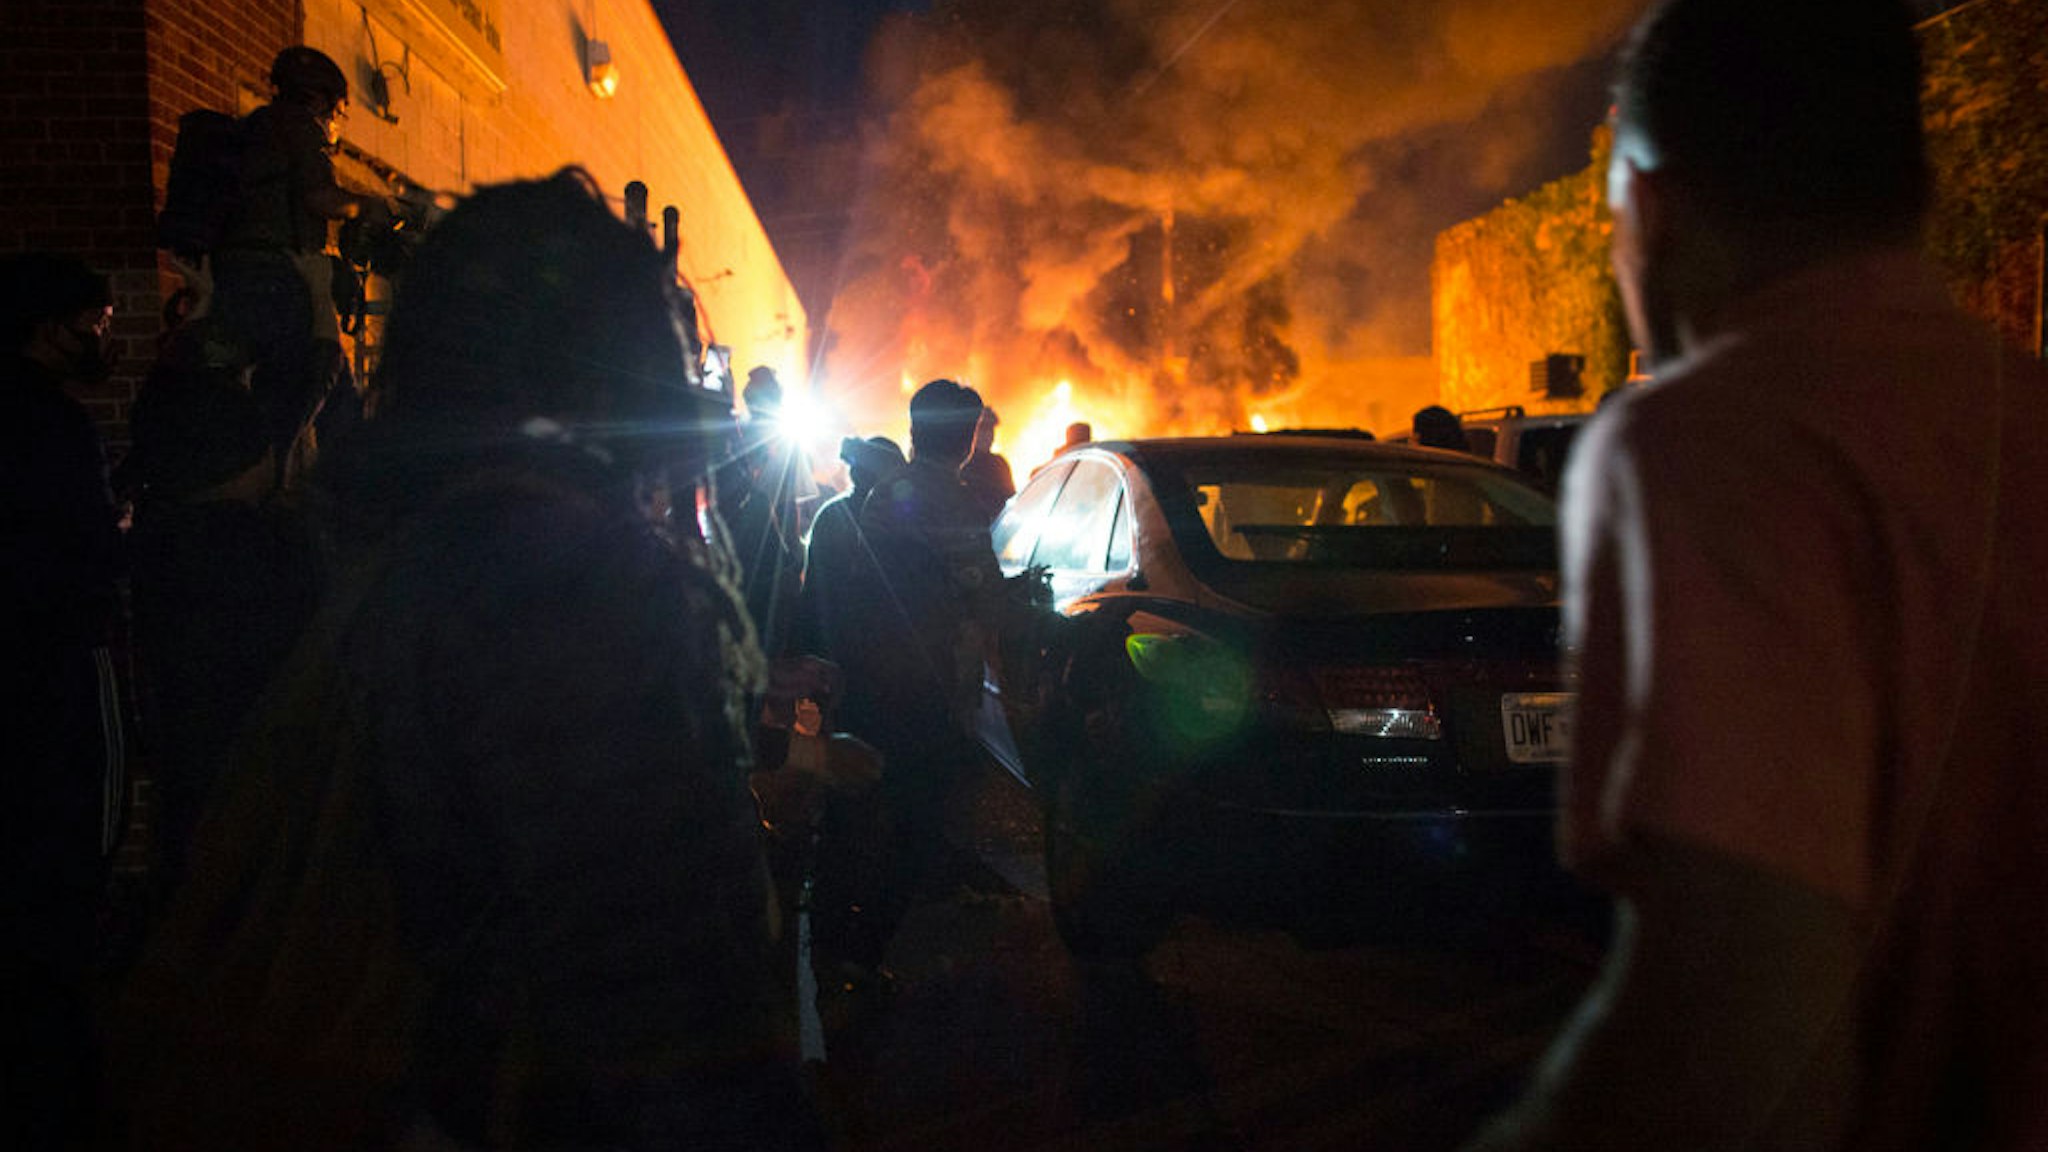 Protesters set fire to a car lot on the corner of Lake street and Park Ave. on Friday night, May 29, 2020. Protesting continues for a third day in response to the death of George Floyd.